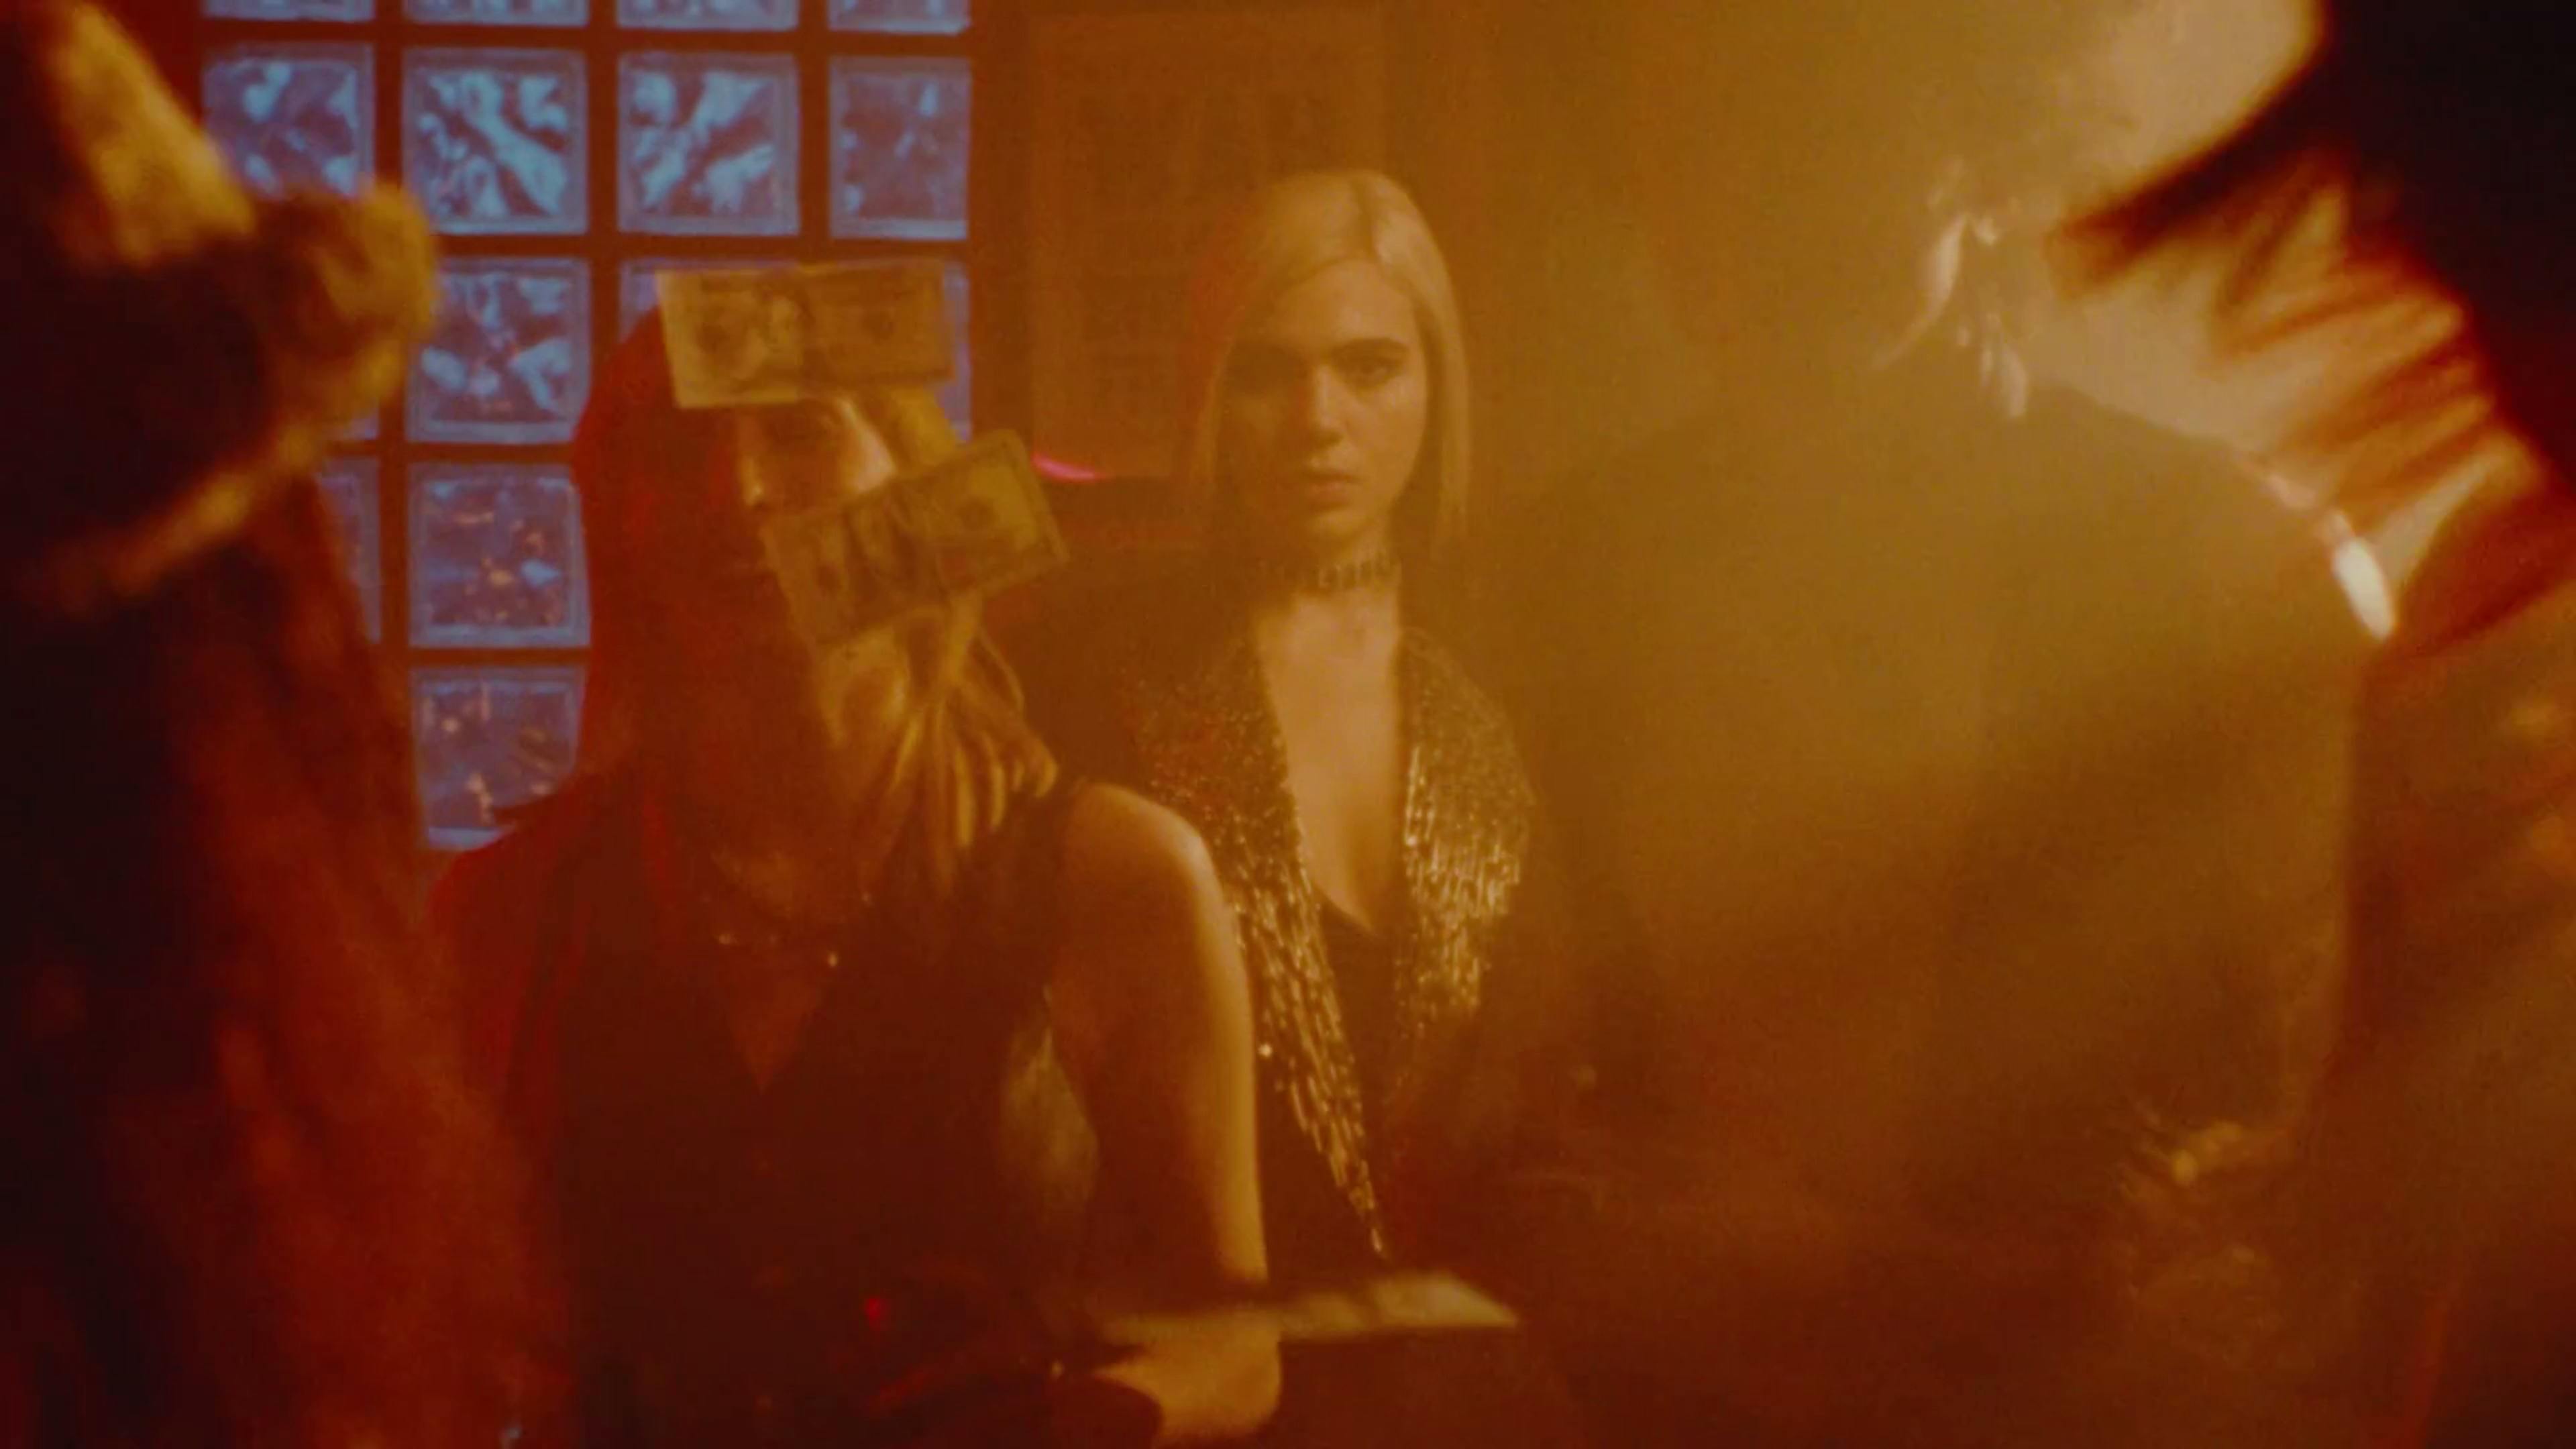 A hazy, reddish-toned still from Sunflower Bean's music video 'Roll The Dice' shows a woman with a stern expression, gazing directly at the camera. She's adorned with a glittering, chain-like garment, and the blurred foreground suggests movement. The soft focus and warm lighting create a moody and mysterious atmosphere.